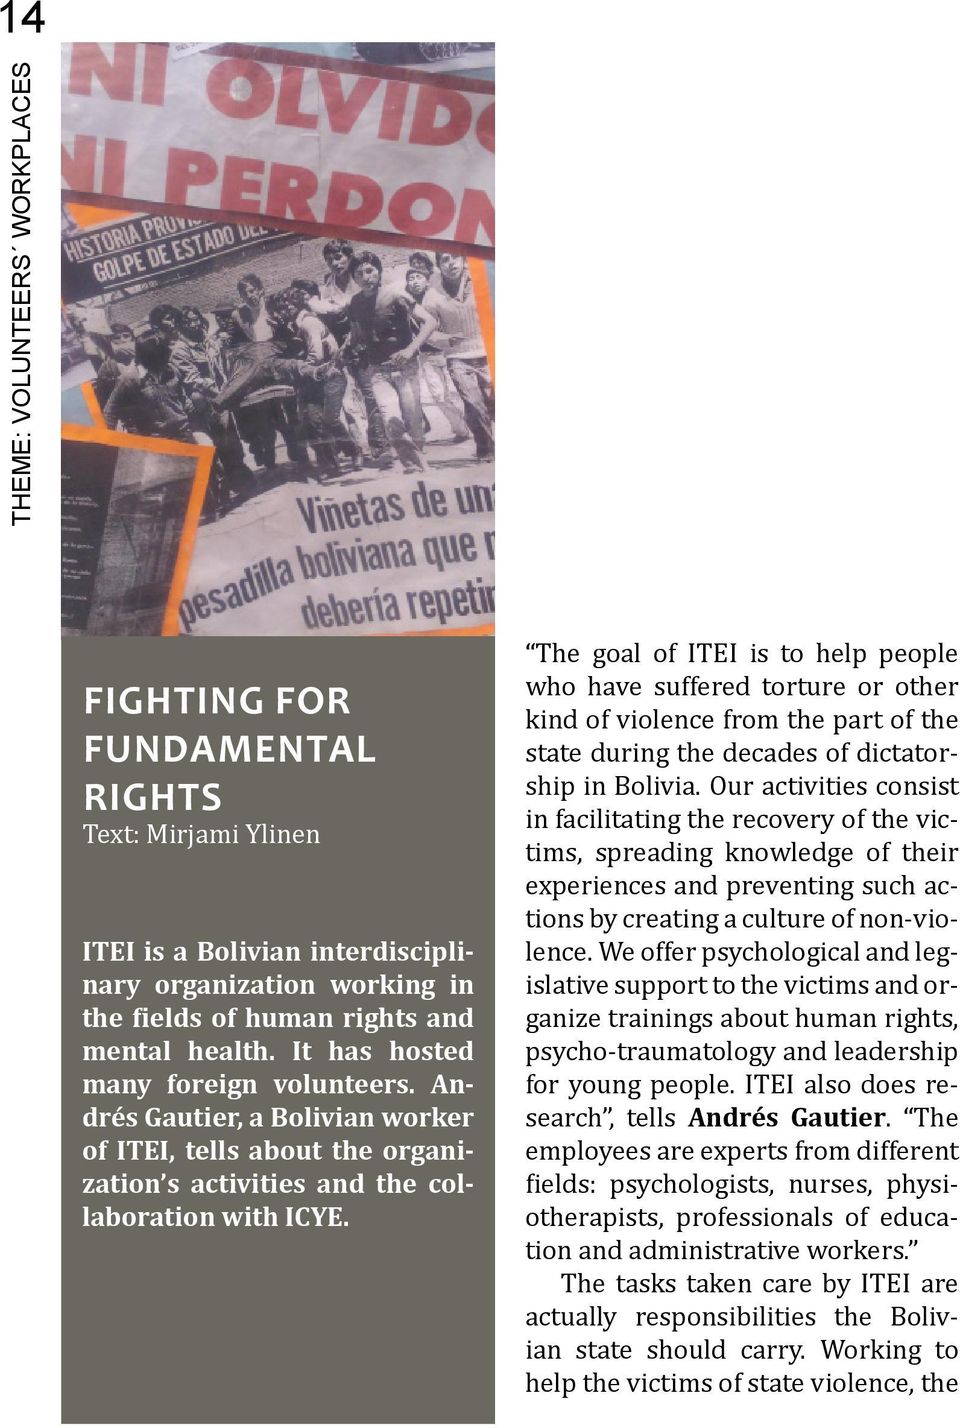 The goal of ITEI is to help people who have suffered torture or other kind of violence from the part of the state during the decades of dictatorship in Bolivia.